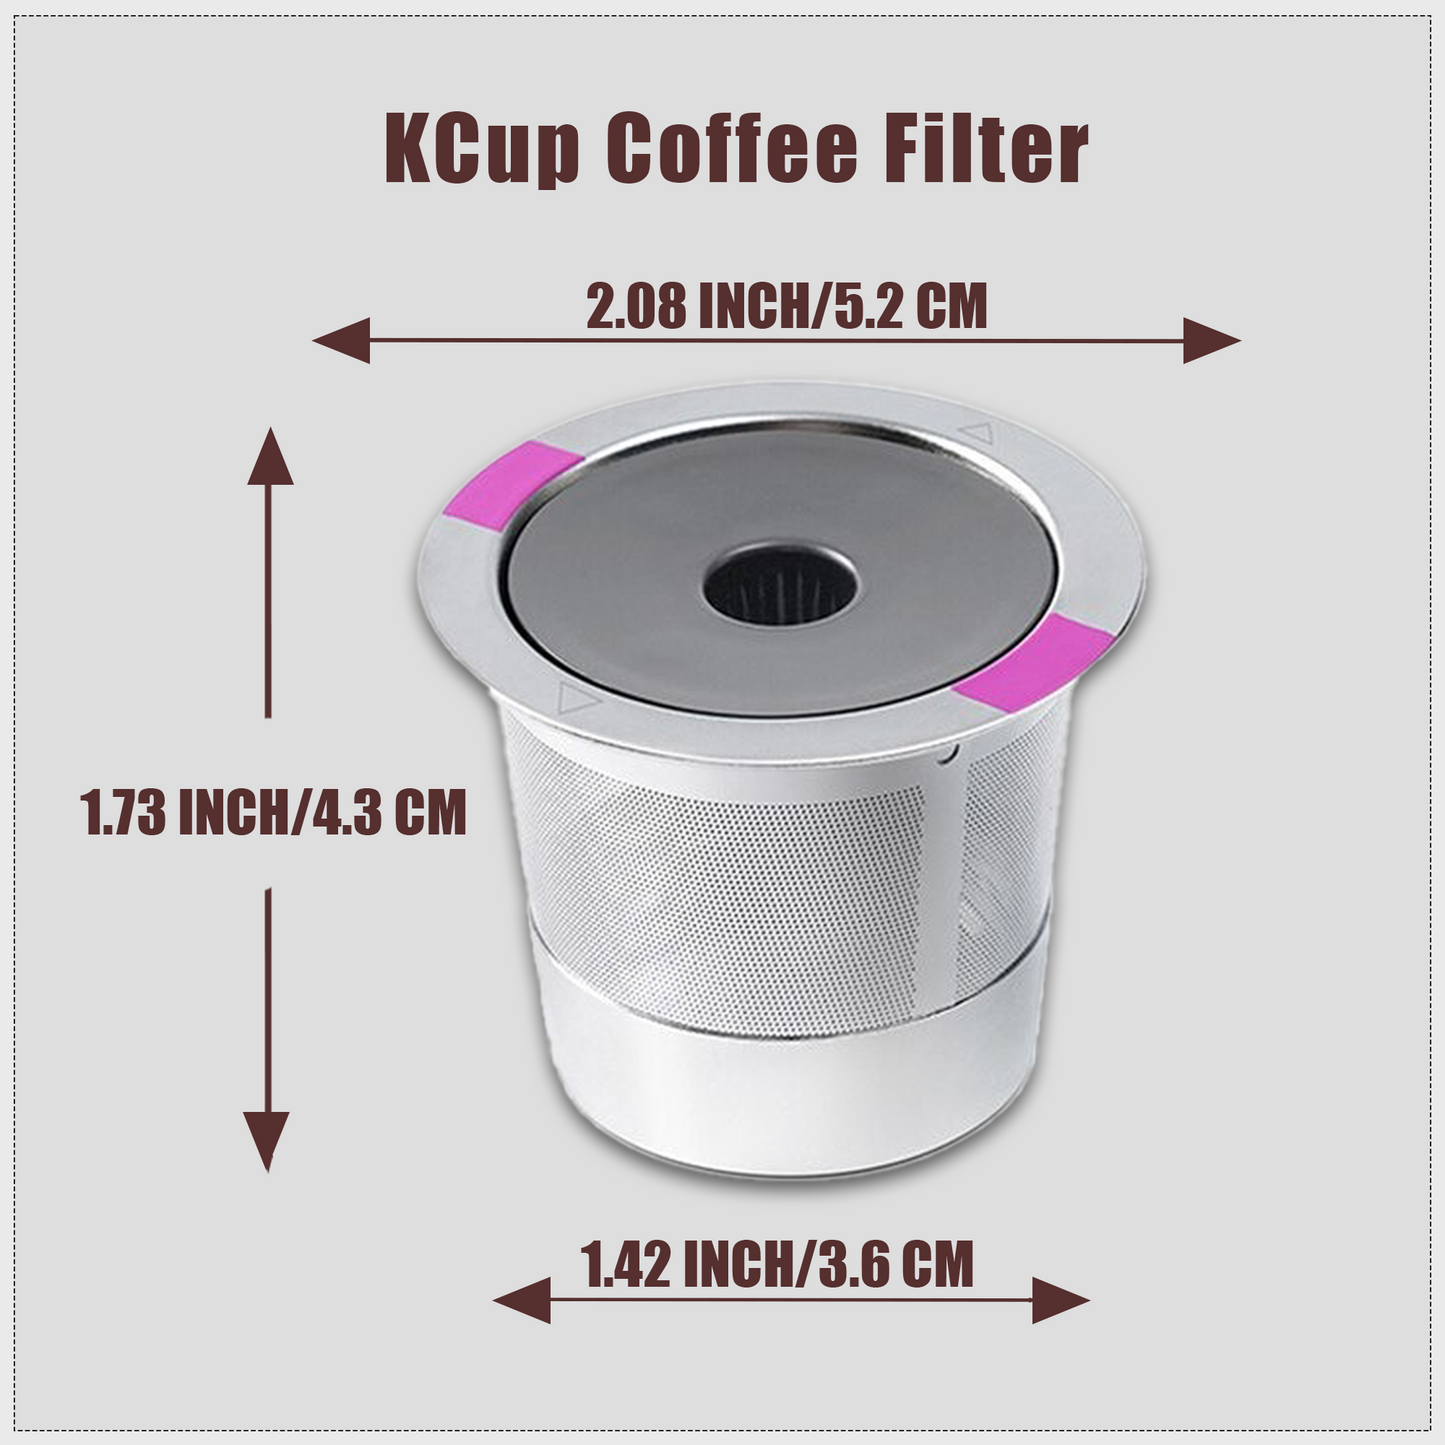 Reusable K Cups Coffee Pod Filters, Keurig 1.0 & 2.0 compatible stainless steel